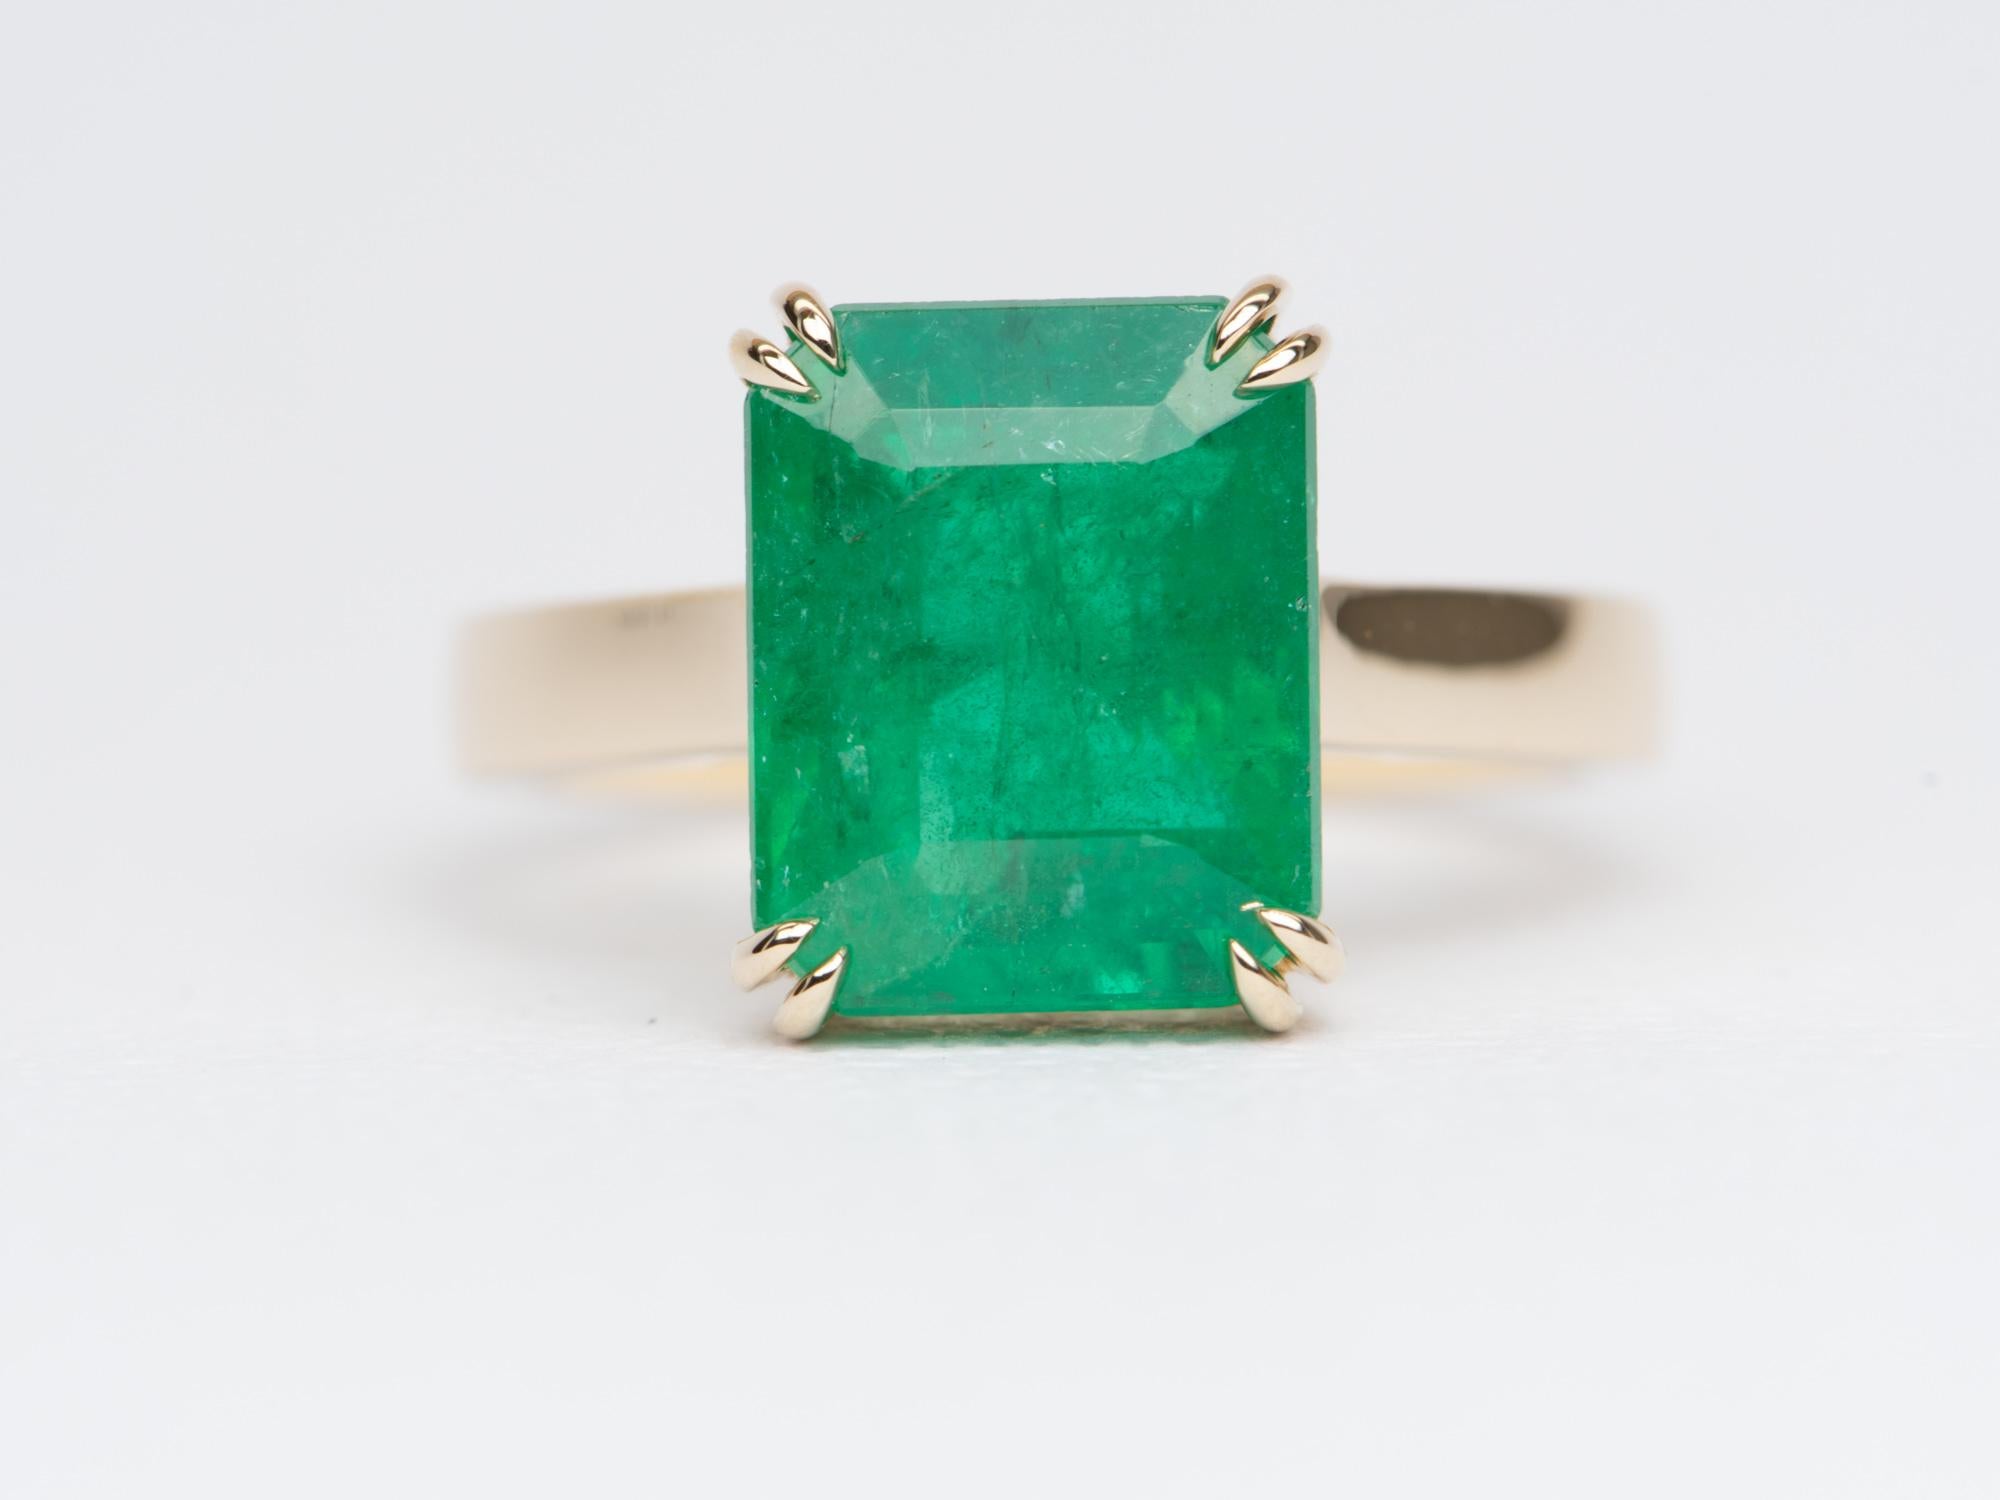 ♥A solid 14K yellow gold ring set with a stunning emerald in the center with double claw prongs
♥ Gorgeous green color!
♥ The item measures 12.1mm in length, 9.9mm in width, and stands 7.8mm from the finger

♥ US Size 7 (Free resizing up or down 1